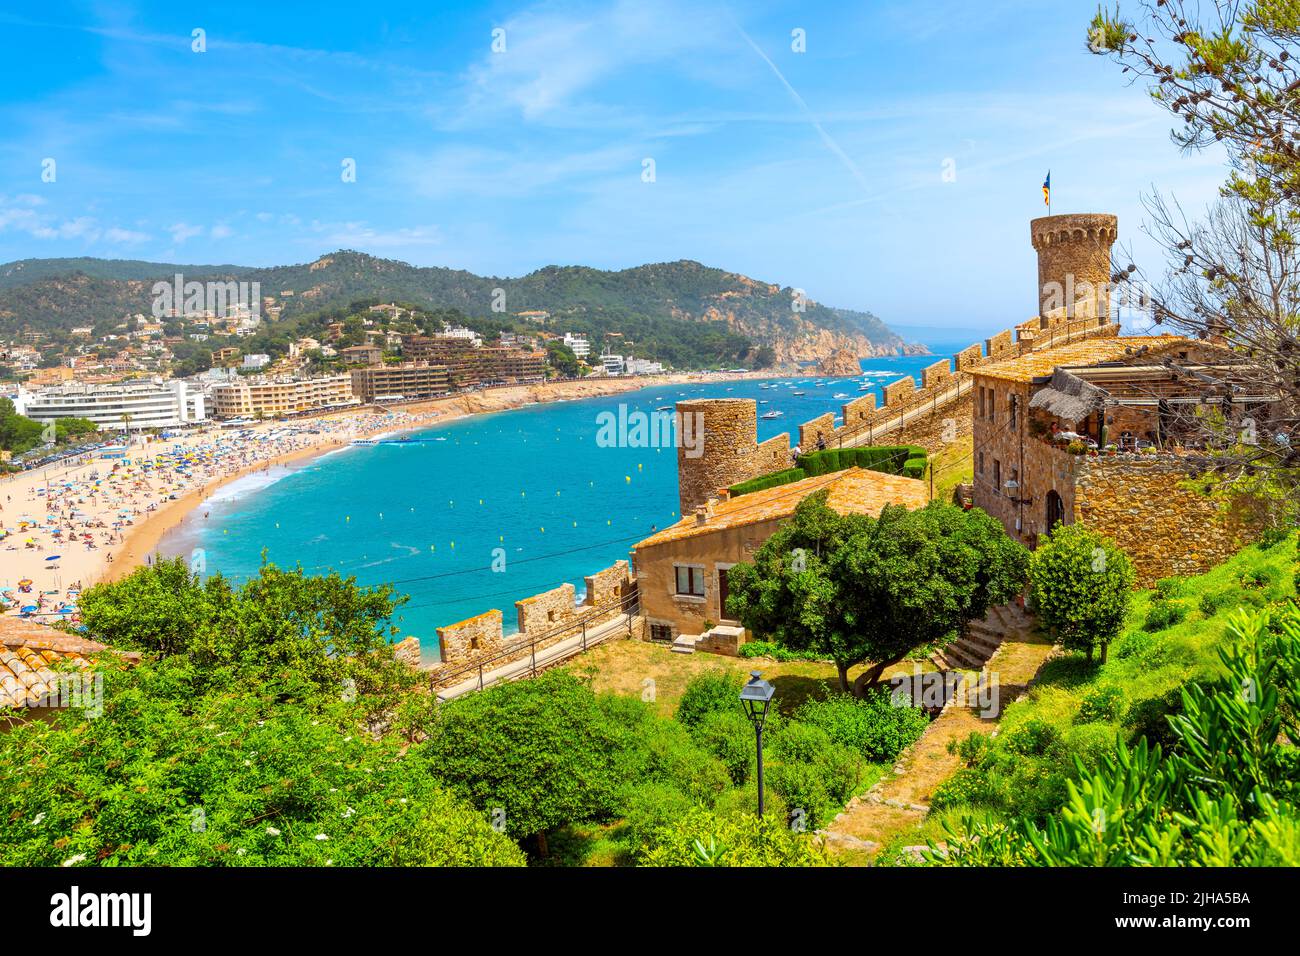 Views from the 12th century hilltop castle of the beach and old town of Tossa De Mar, Spain, along the Costa Brava coastline. Stock Photo